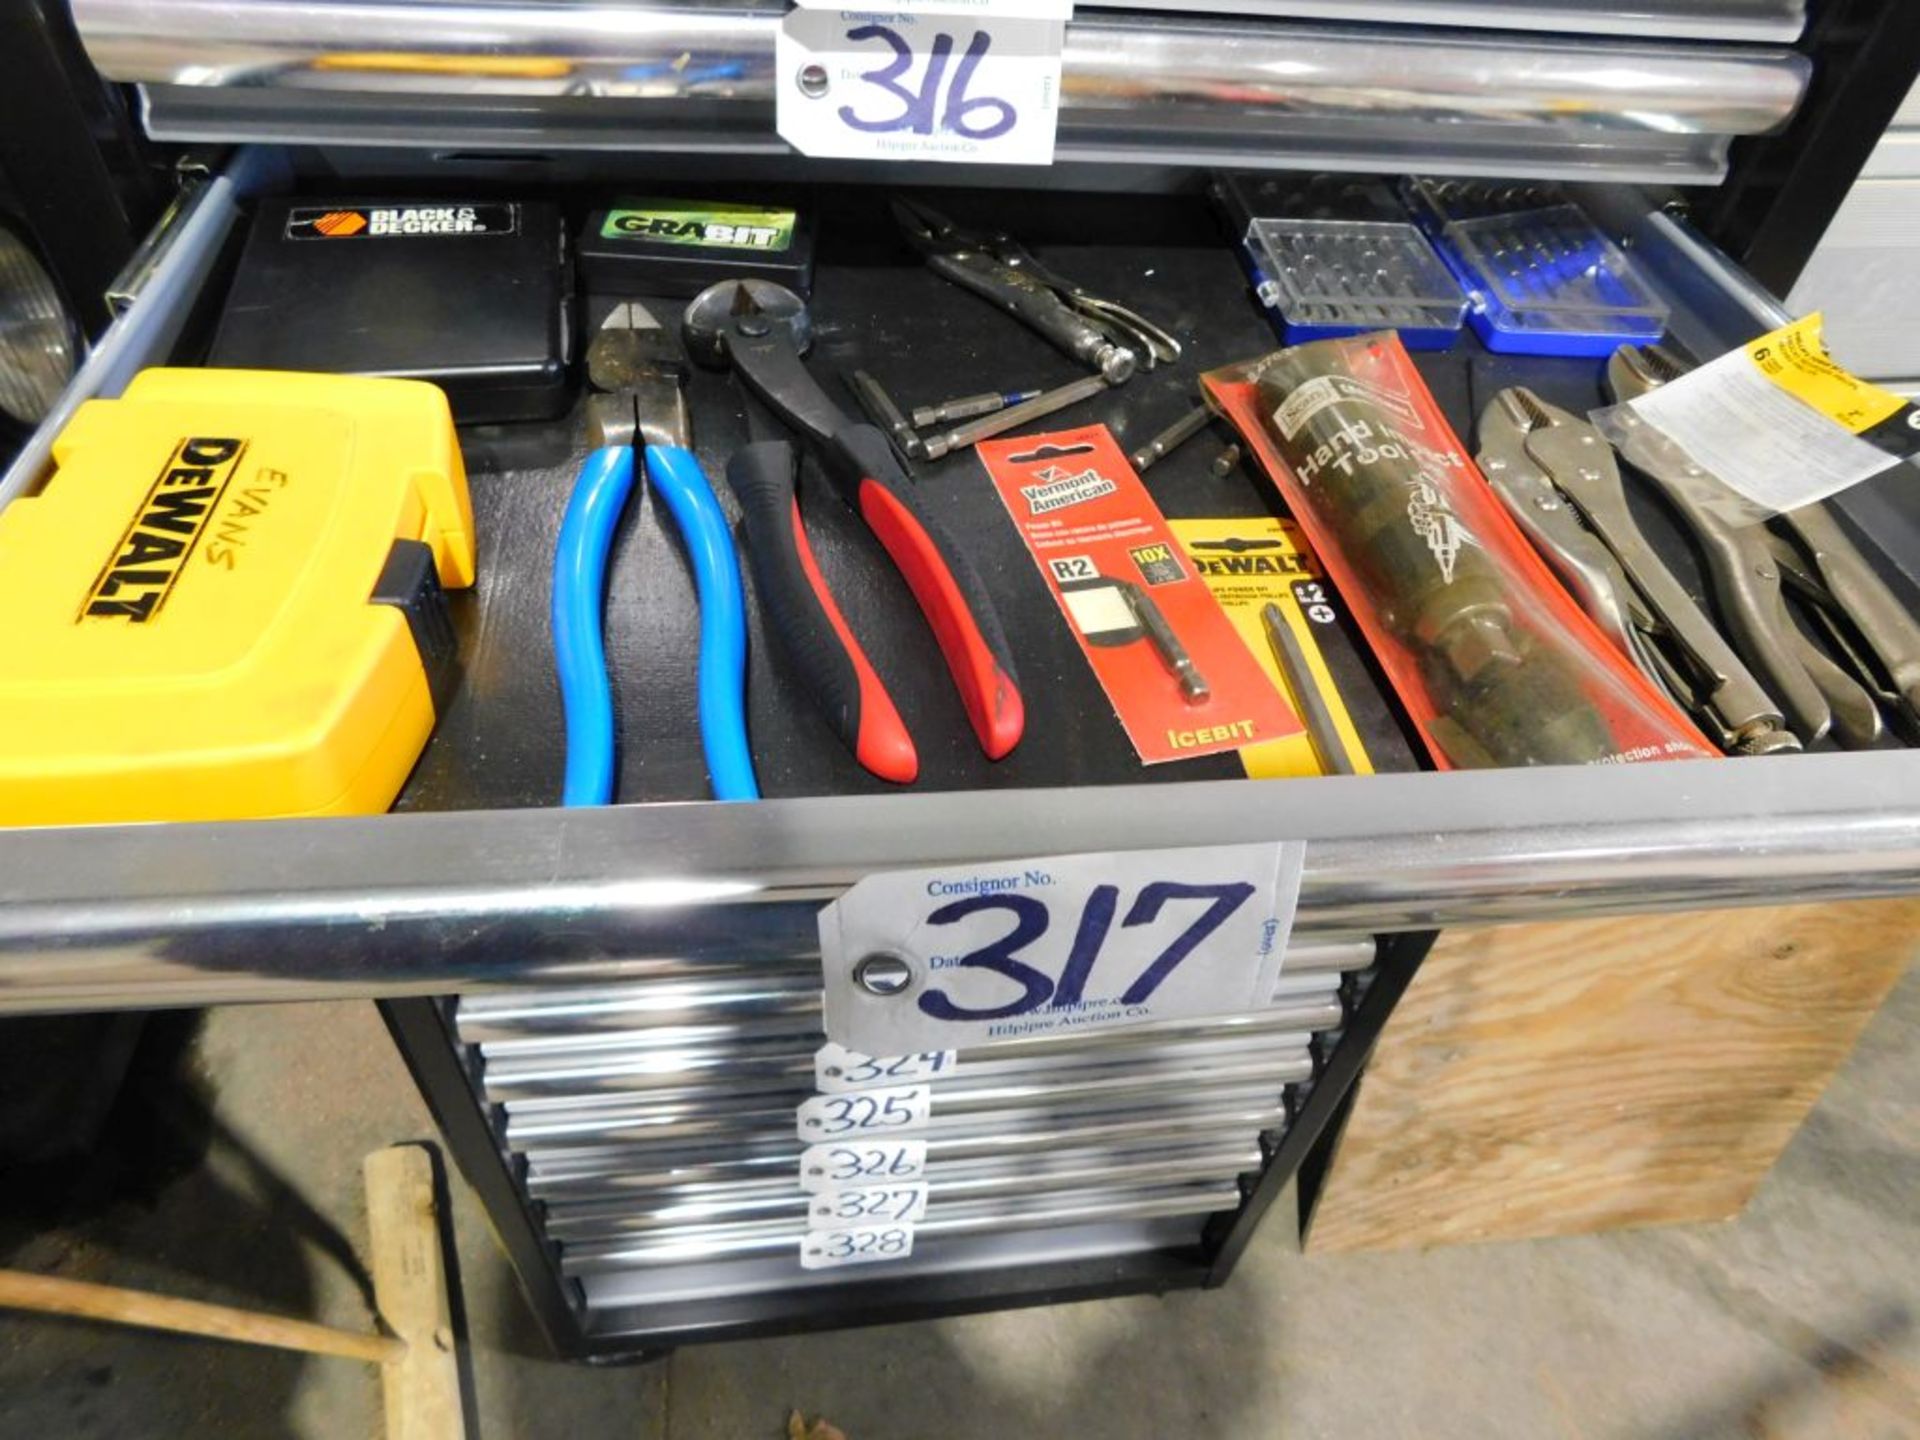 Assorted tool contents of drawer: Vise grips, drill bits, impact tool, cutters, (approx. 15